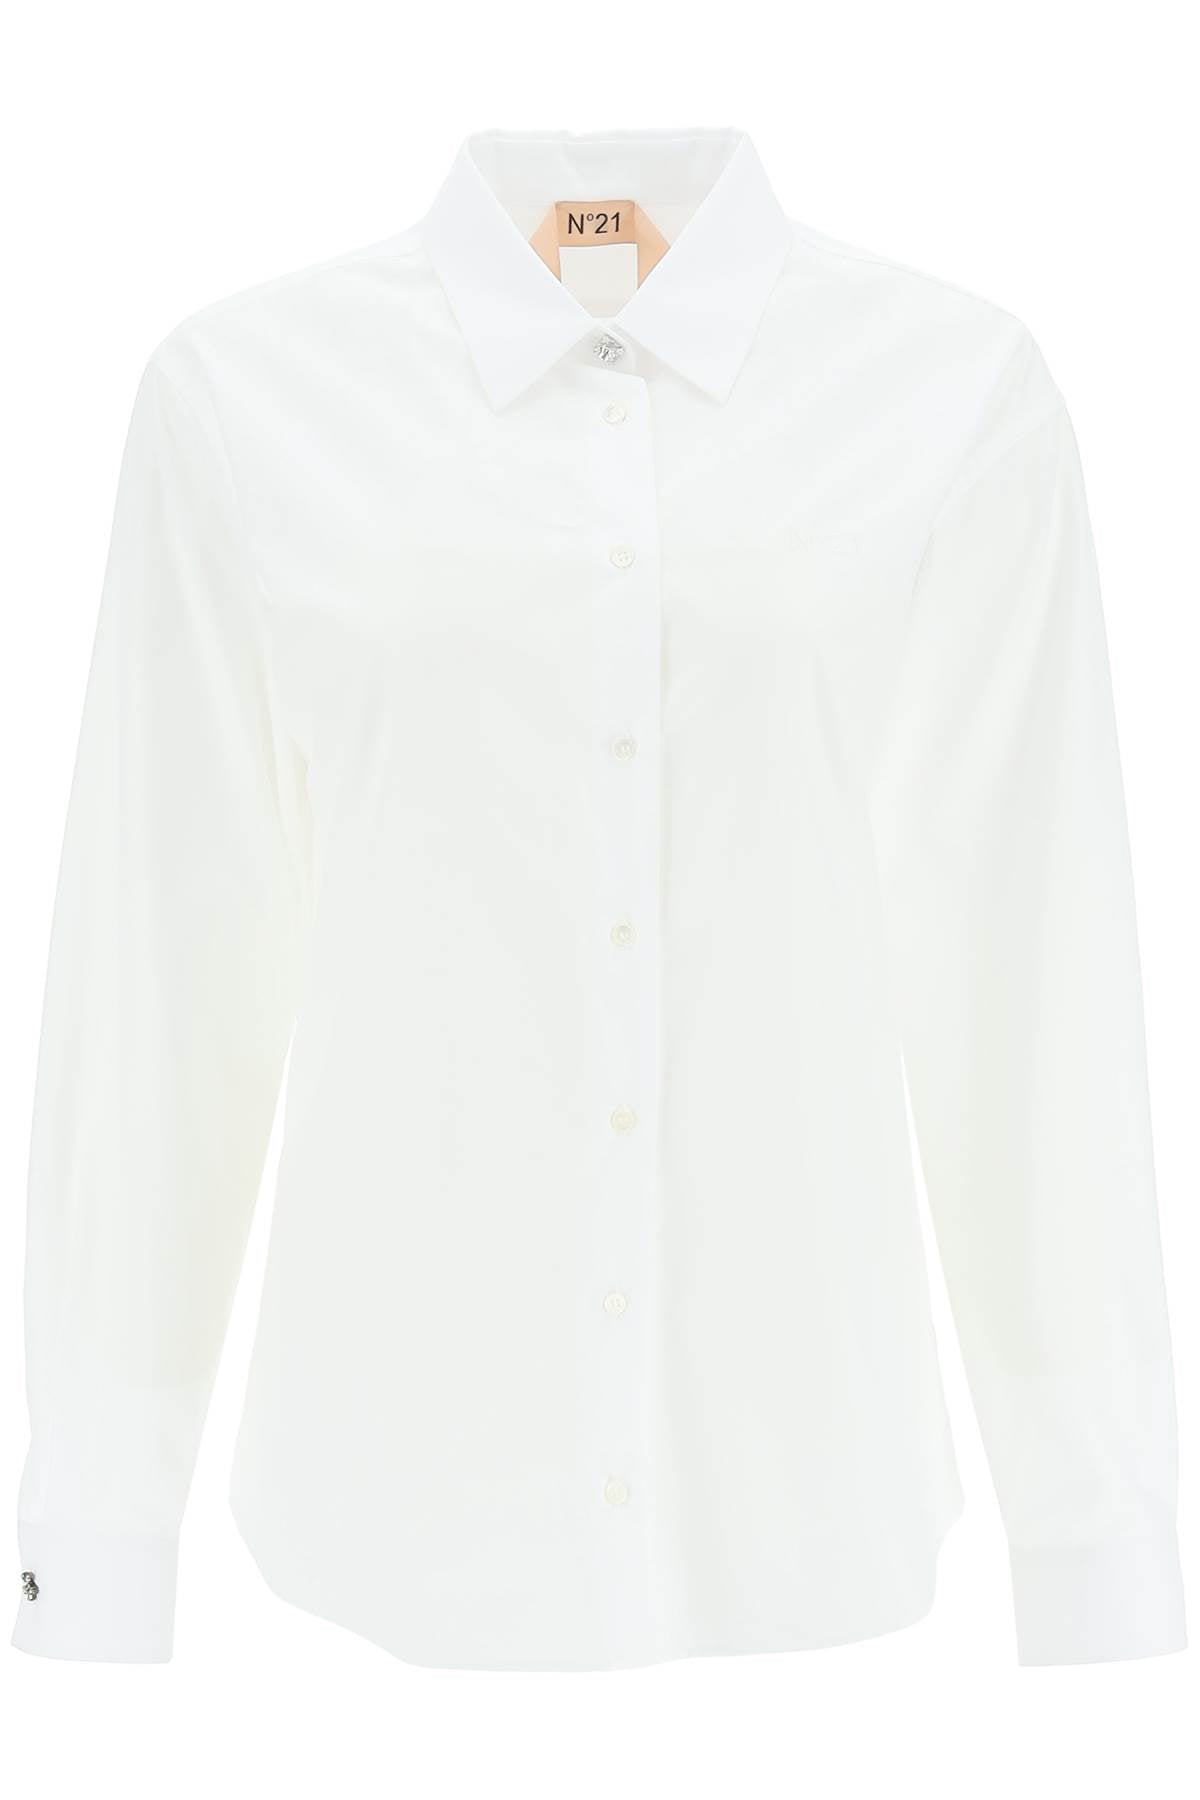 N.21 Shirt With Jewel Buttons   White